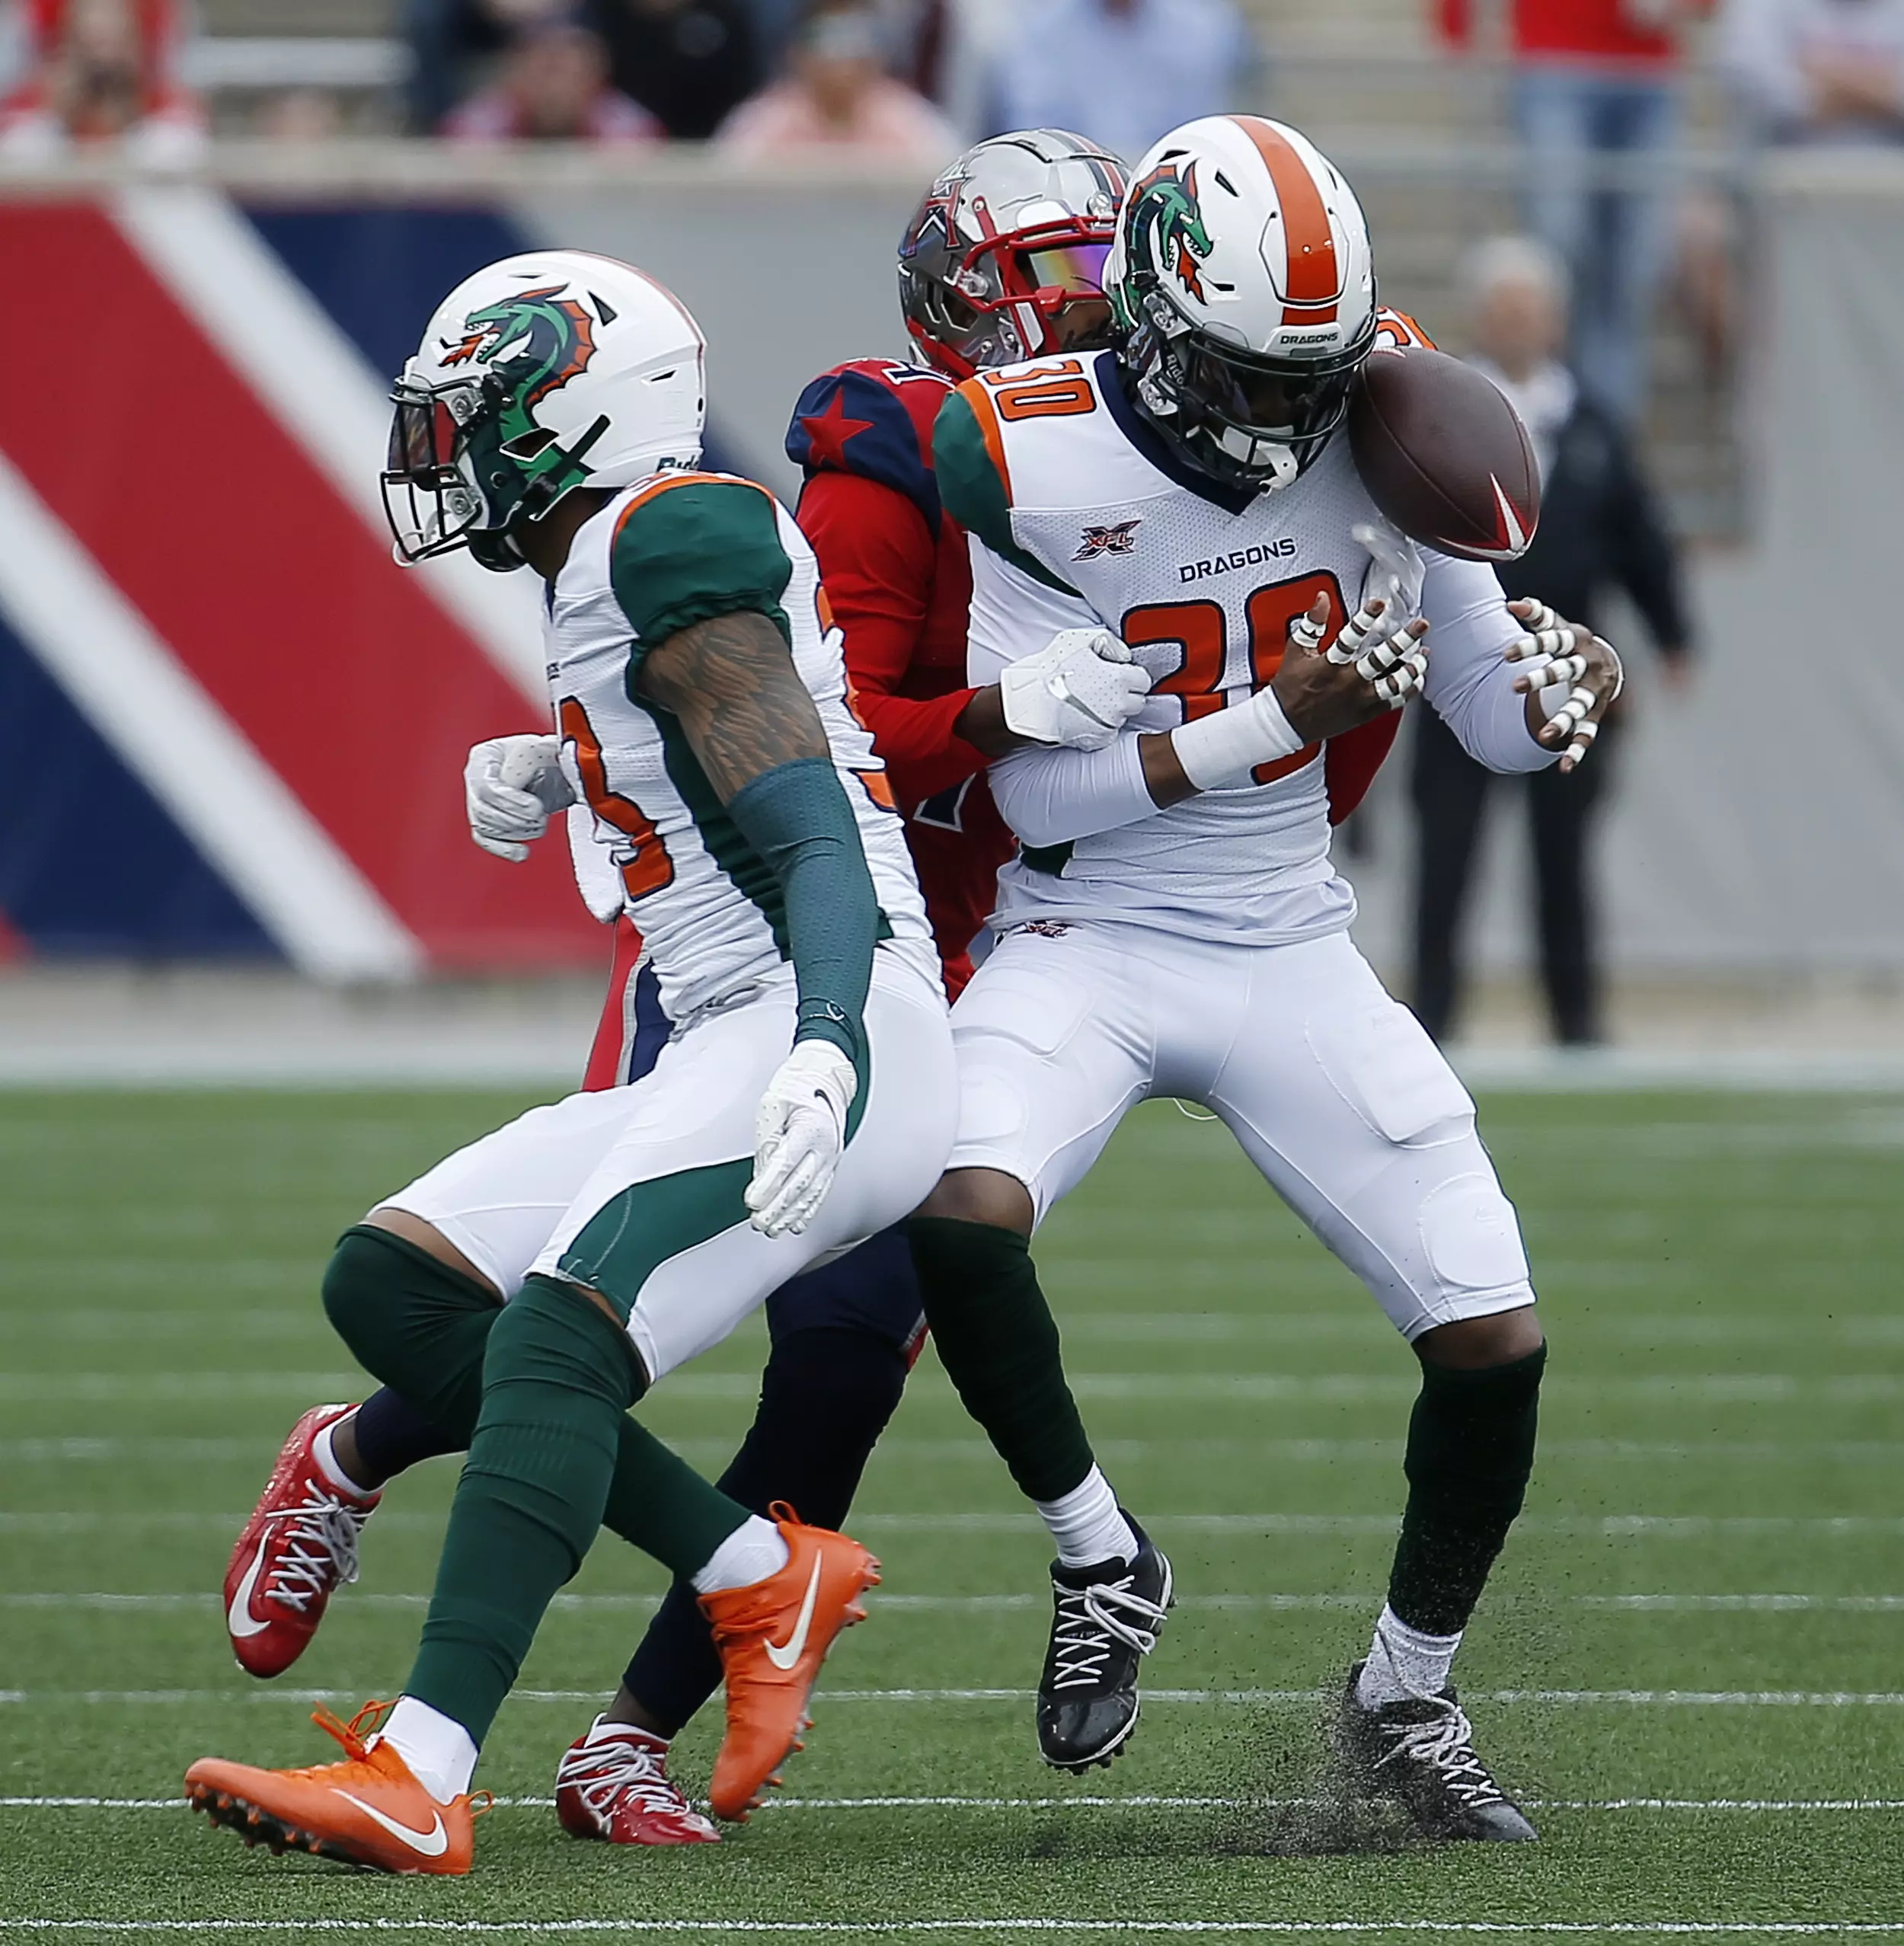 March 25, 2023: Seattle Sea Dragons wide receiver JUWAN GREEN (4) get  tackled during the Orlando Guardians vs Seattle Sea Dragons XFL game at  Camping World Stadium in Orlando, Fl on March